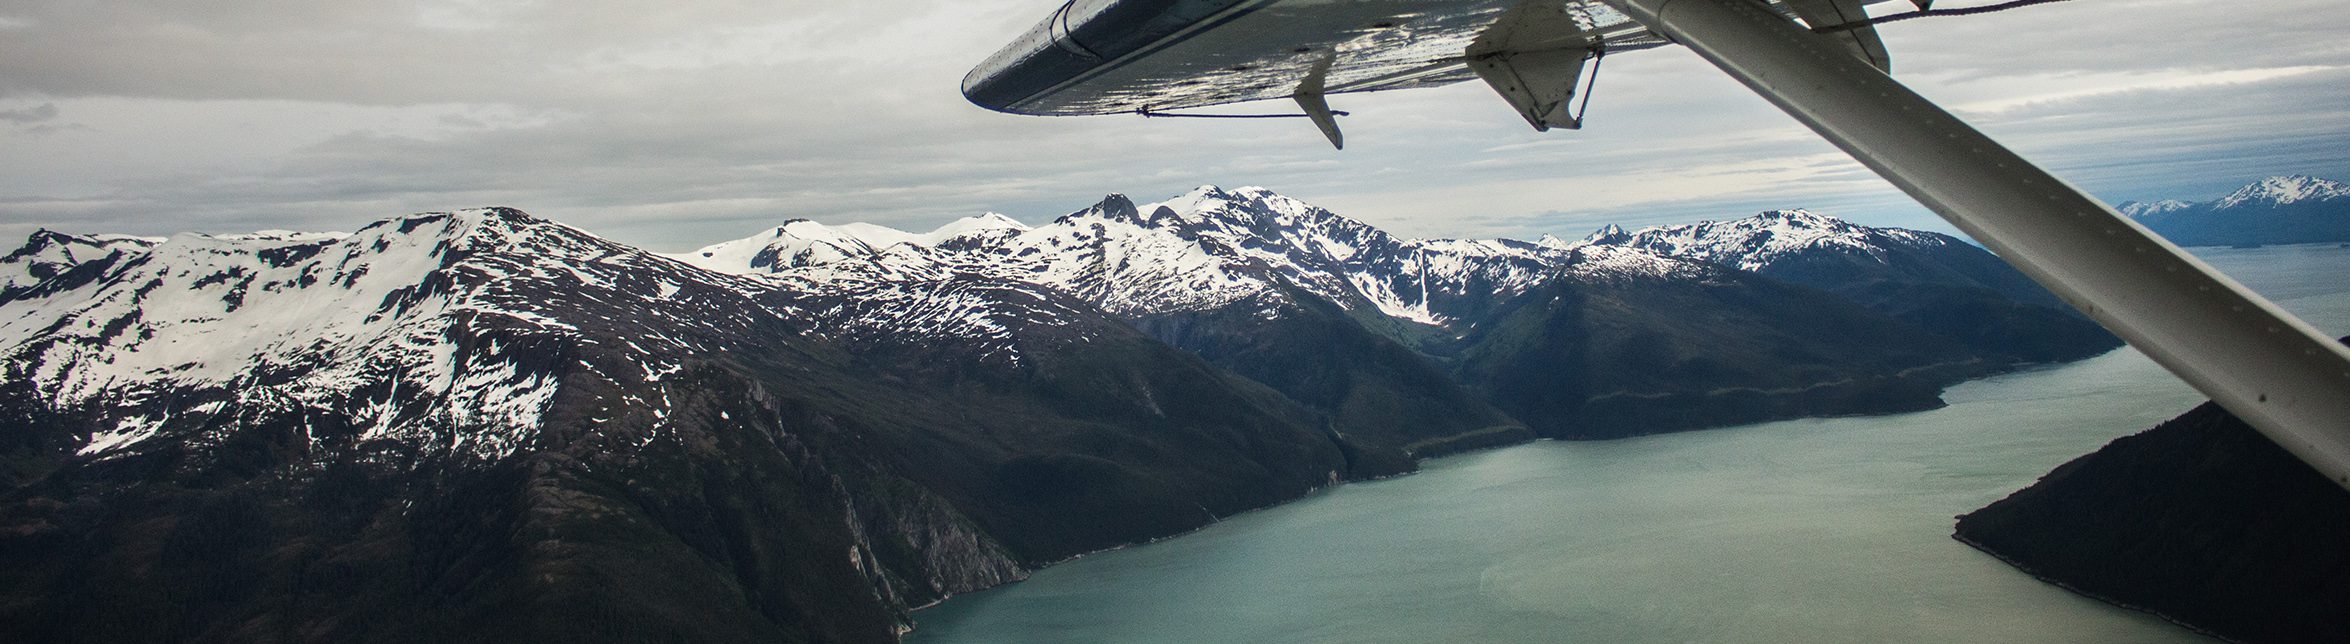 Views of Alaska from a small plane tour